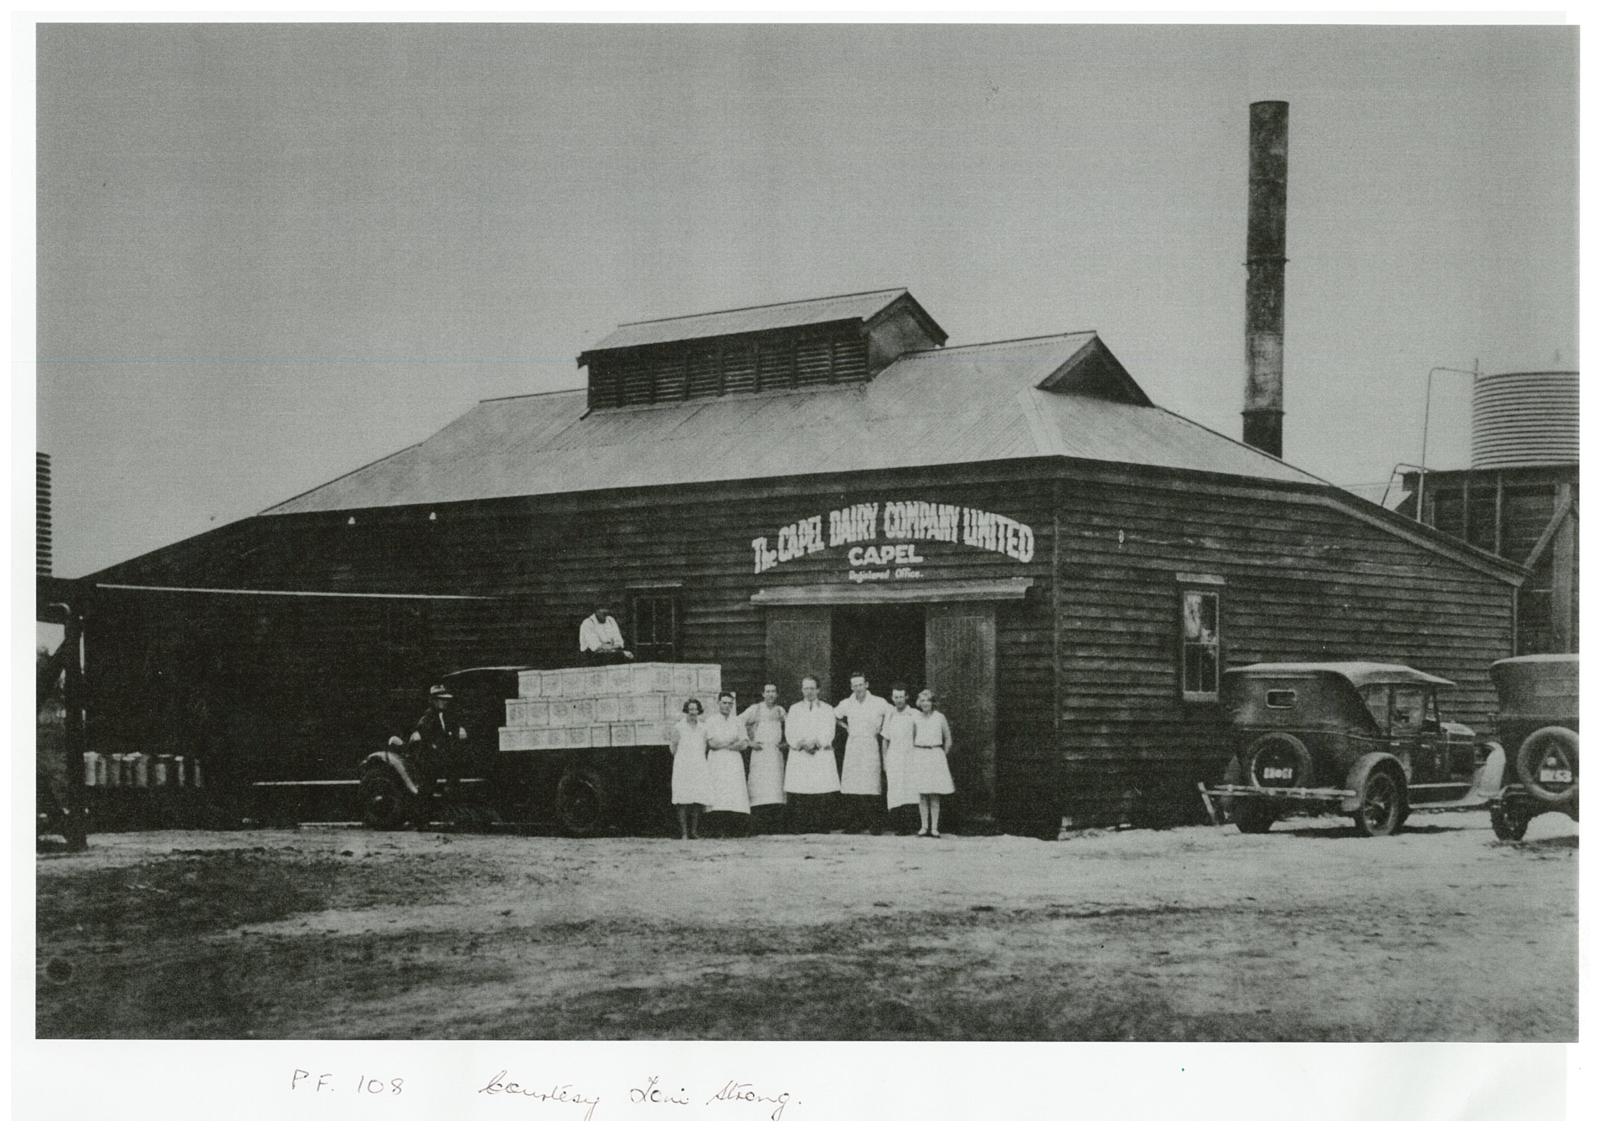 The Capel Dairy Company Limited 